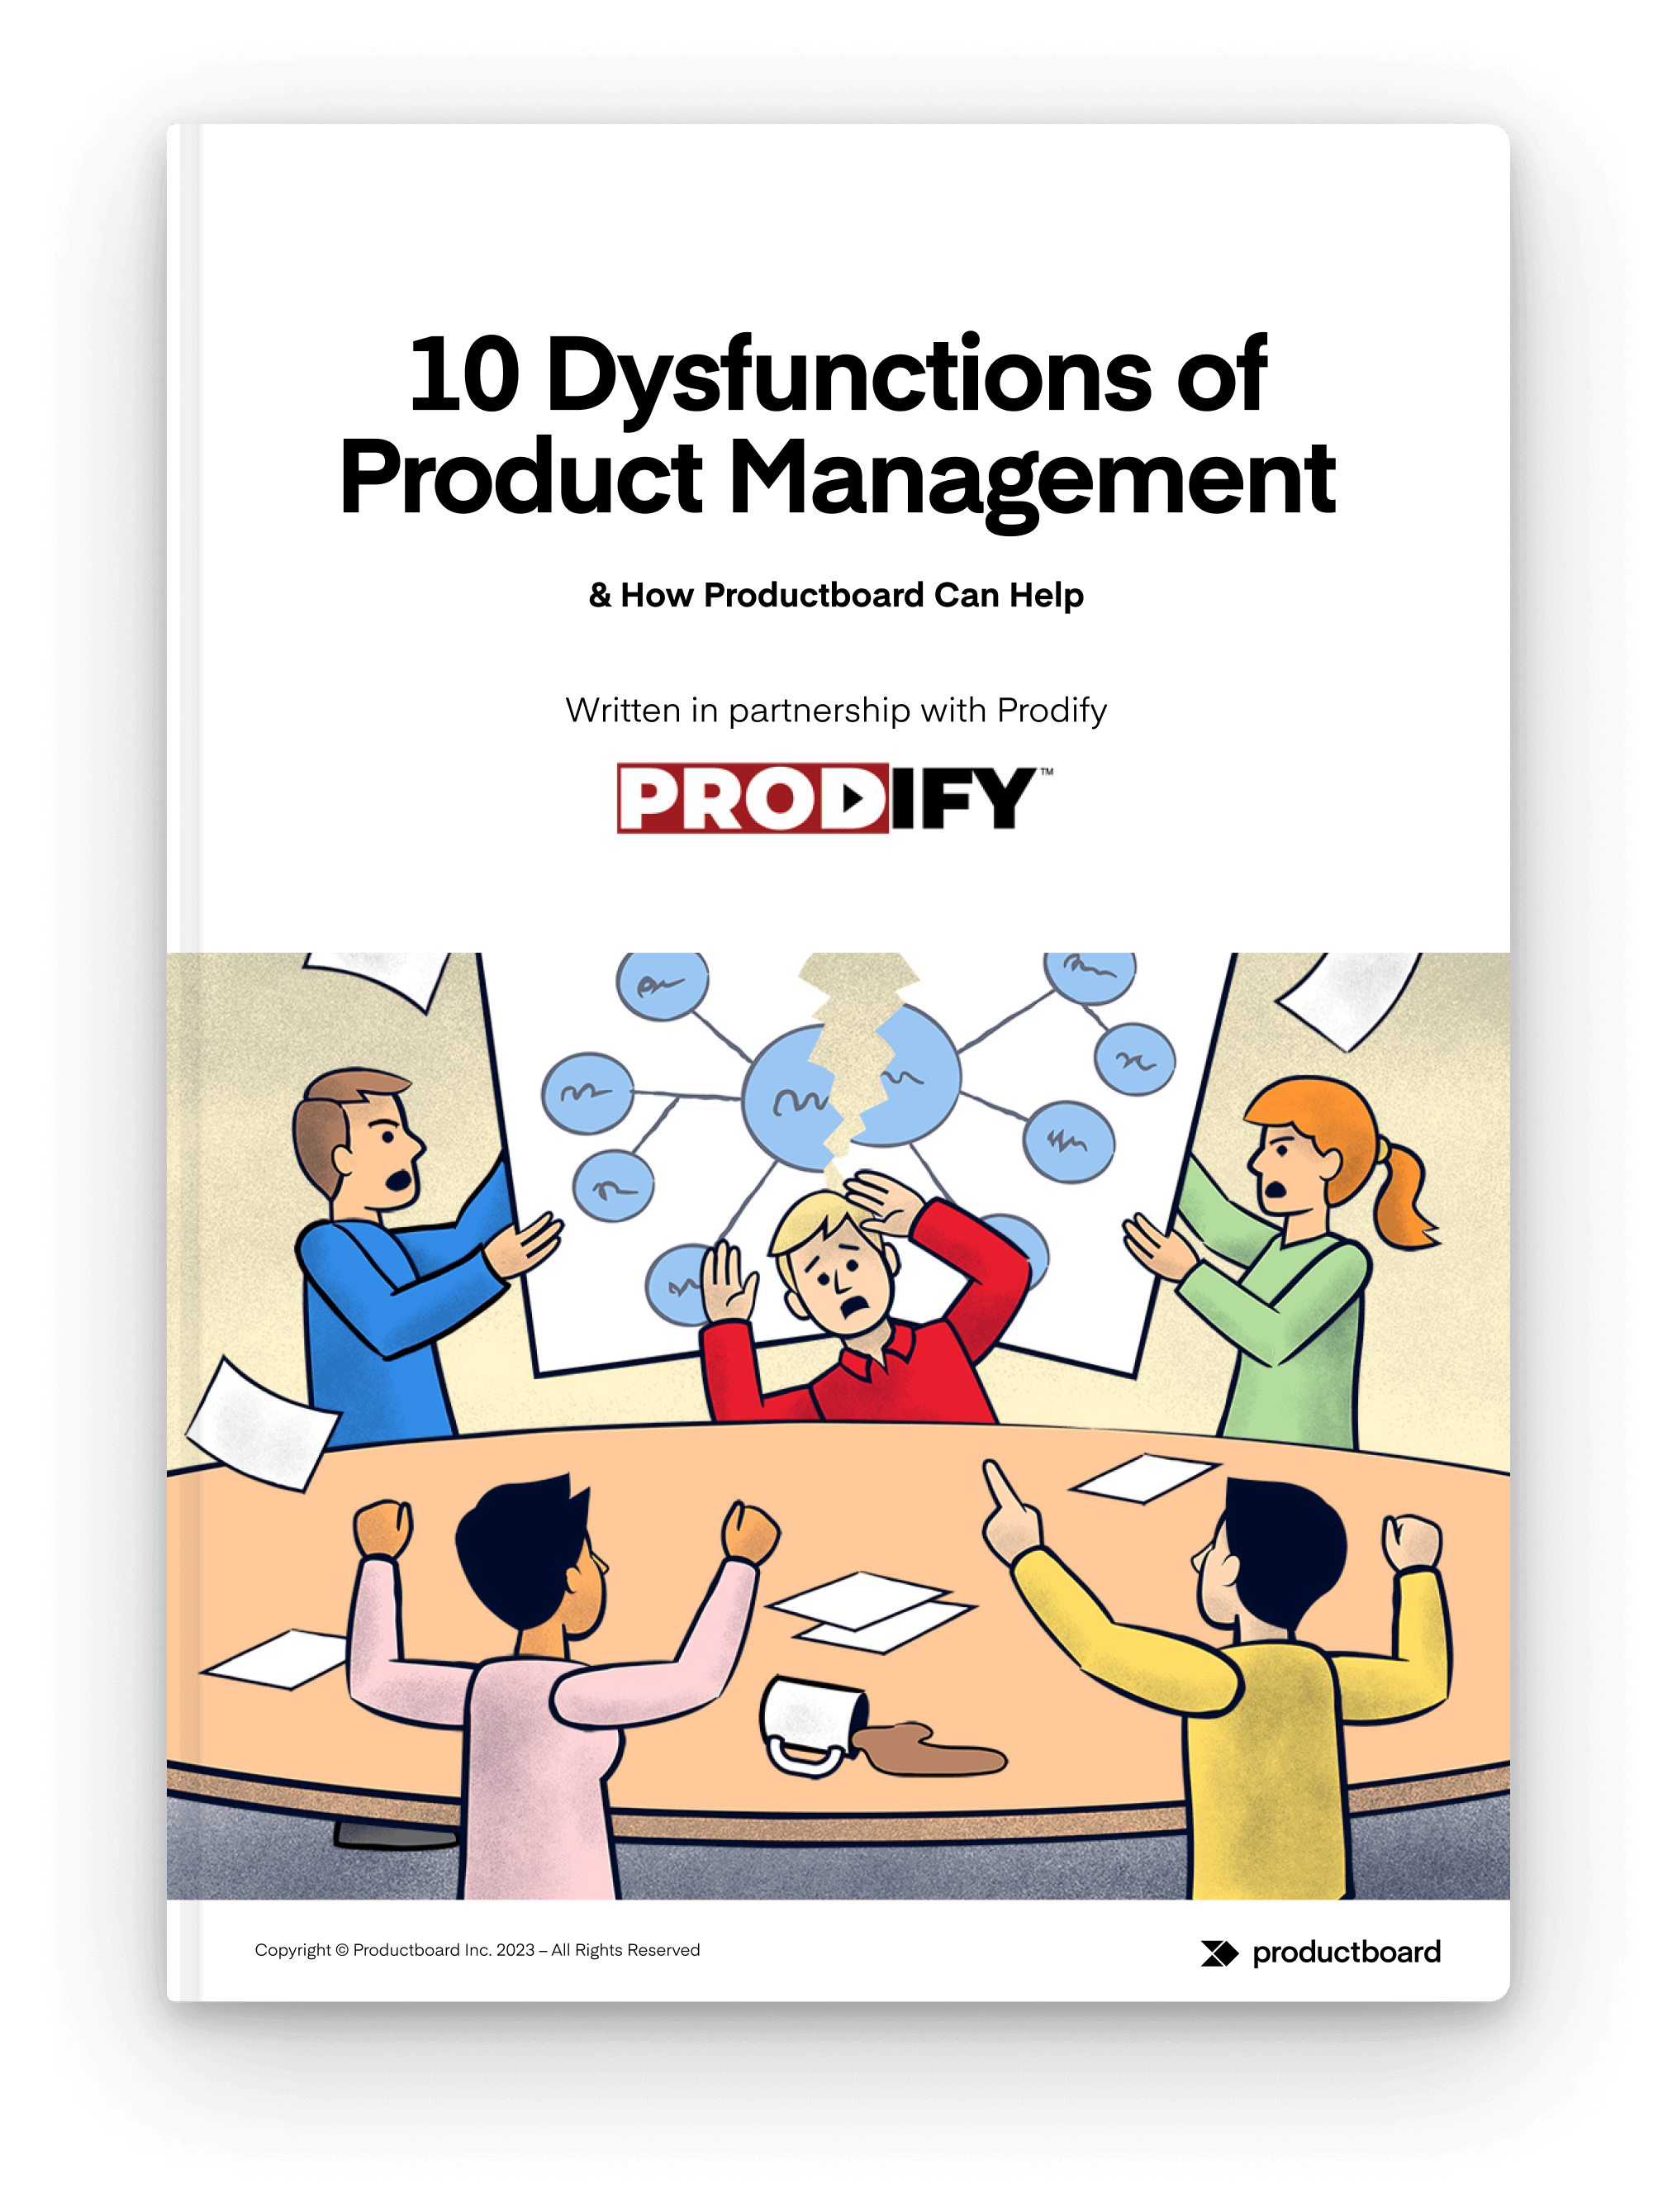 10 Dysfunctions of Product Management